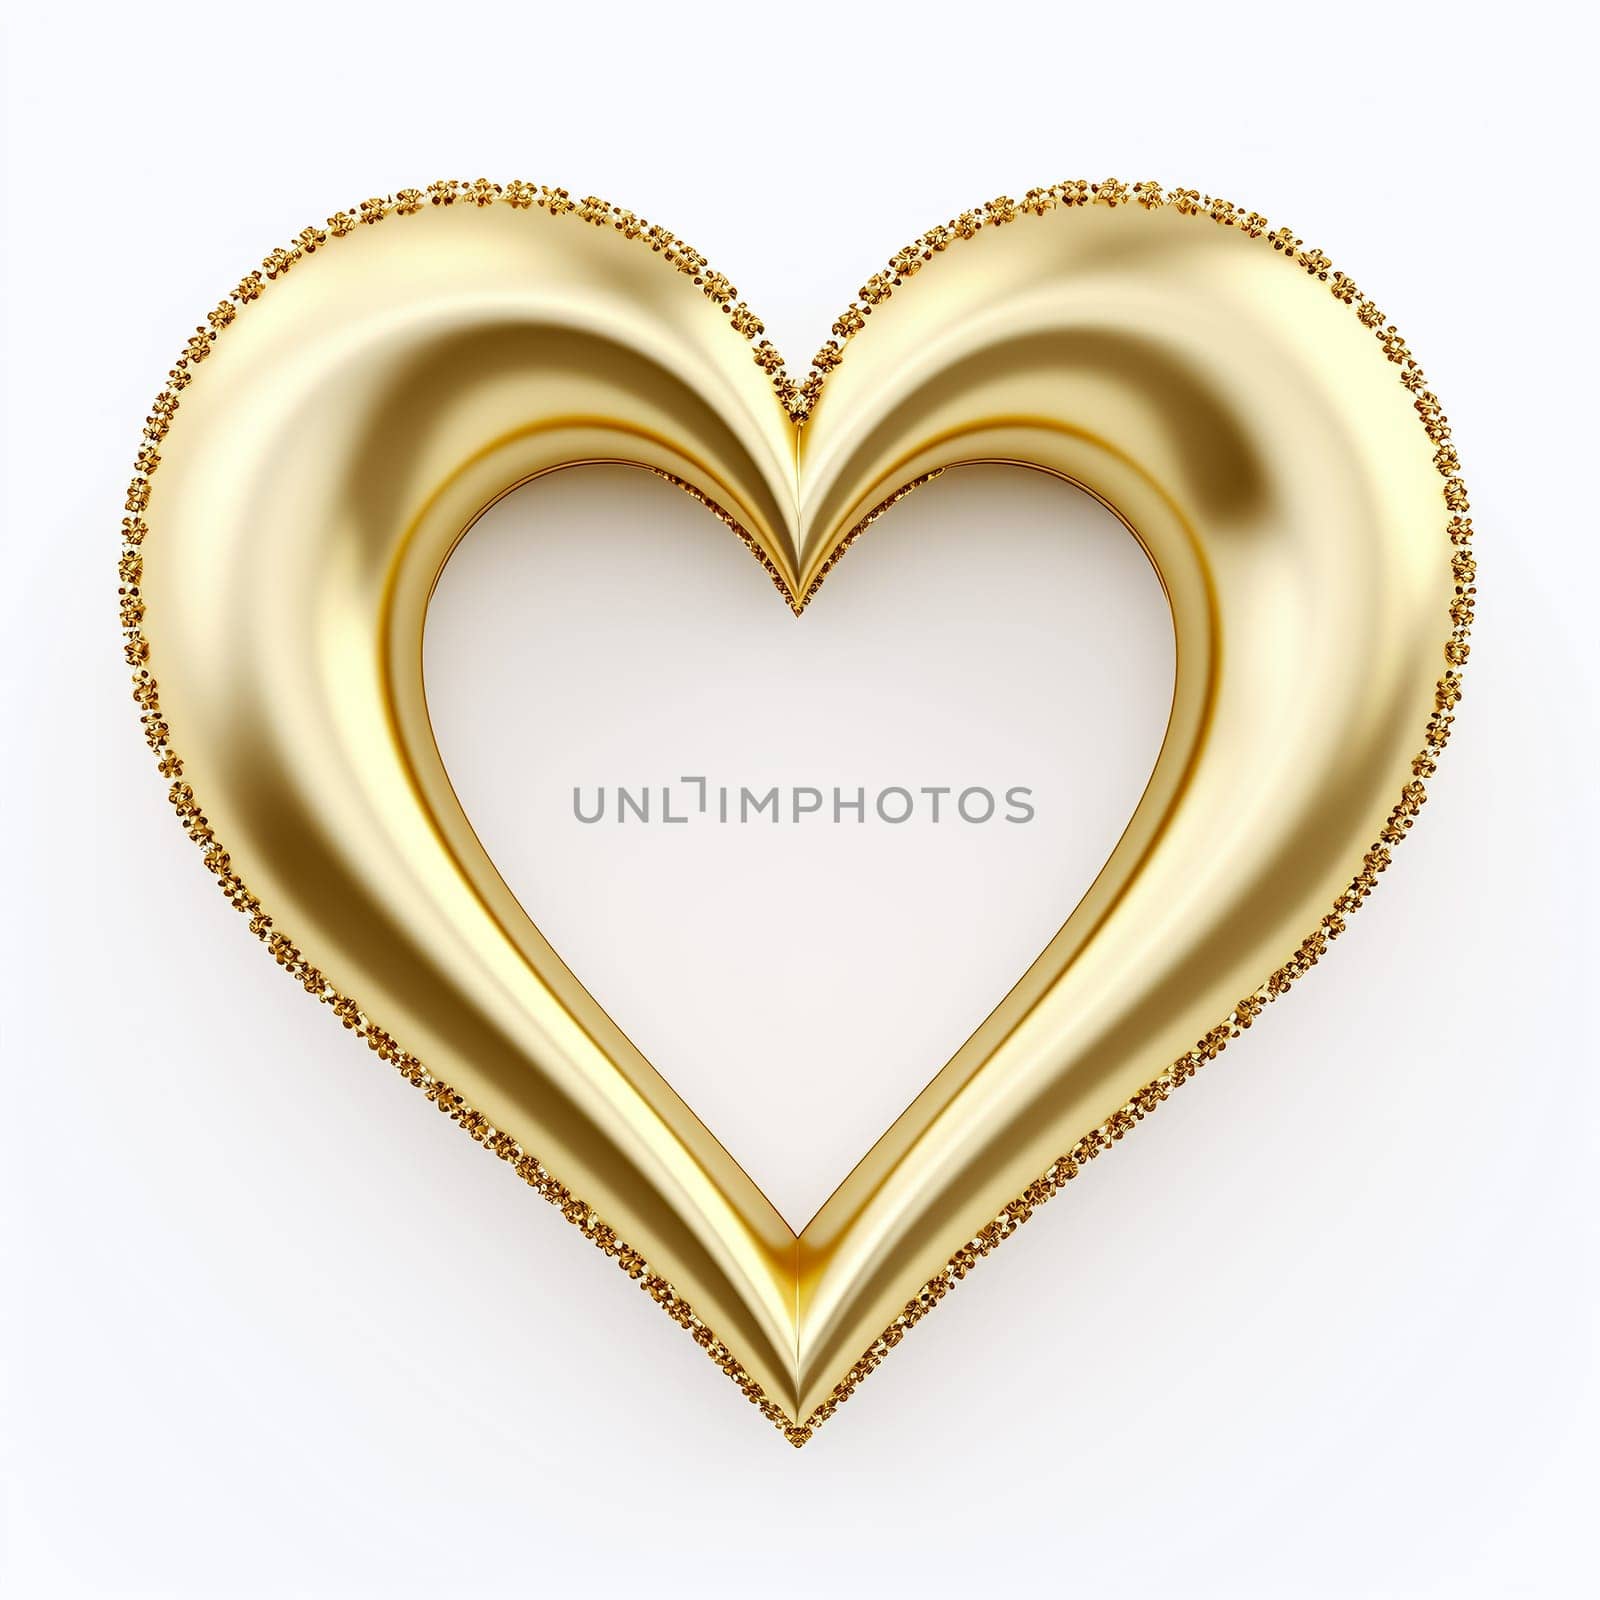 Golden Heart With Sparkling Edges on a White Background by chrisroll